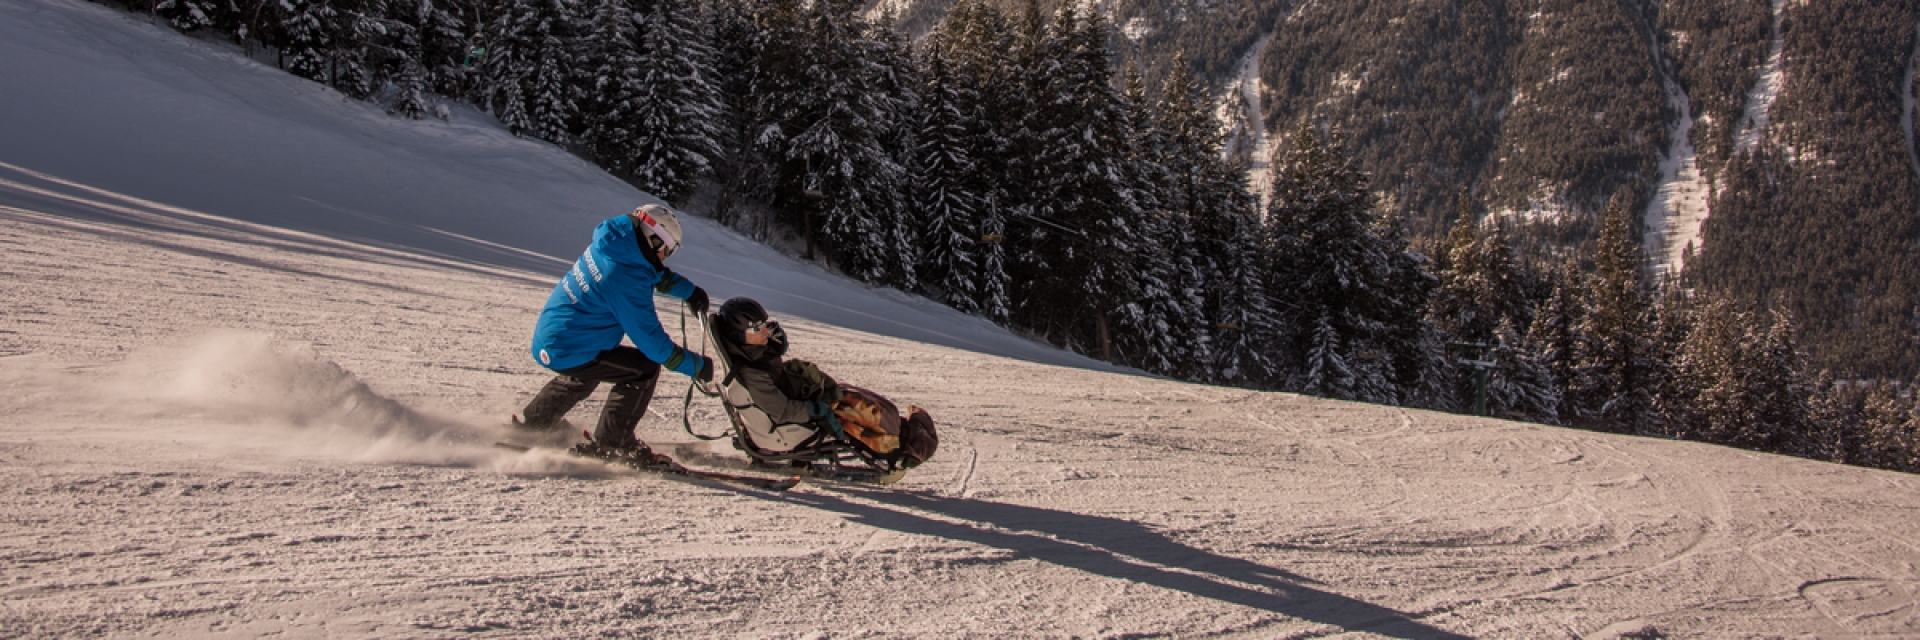 A person pushing another in an accessible skiing wheelchair